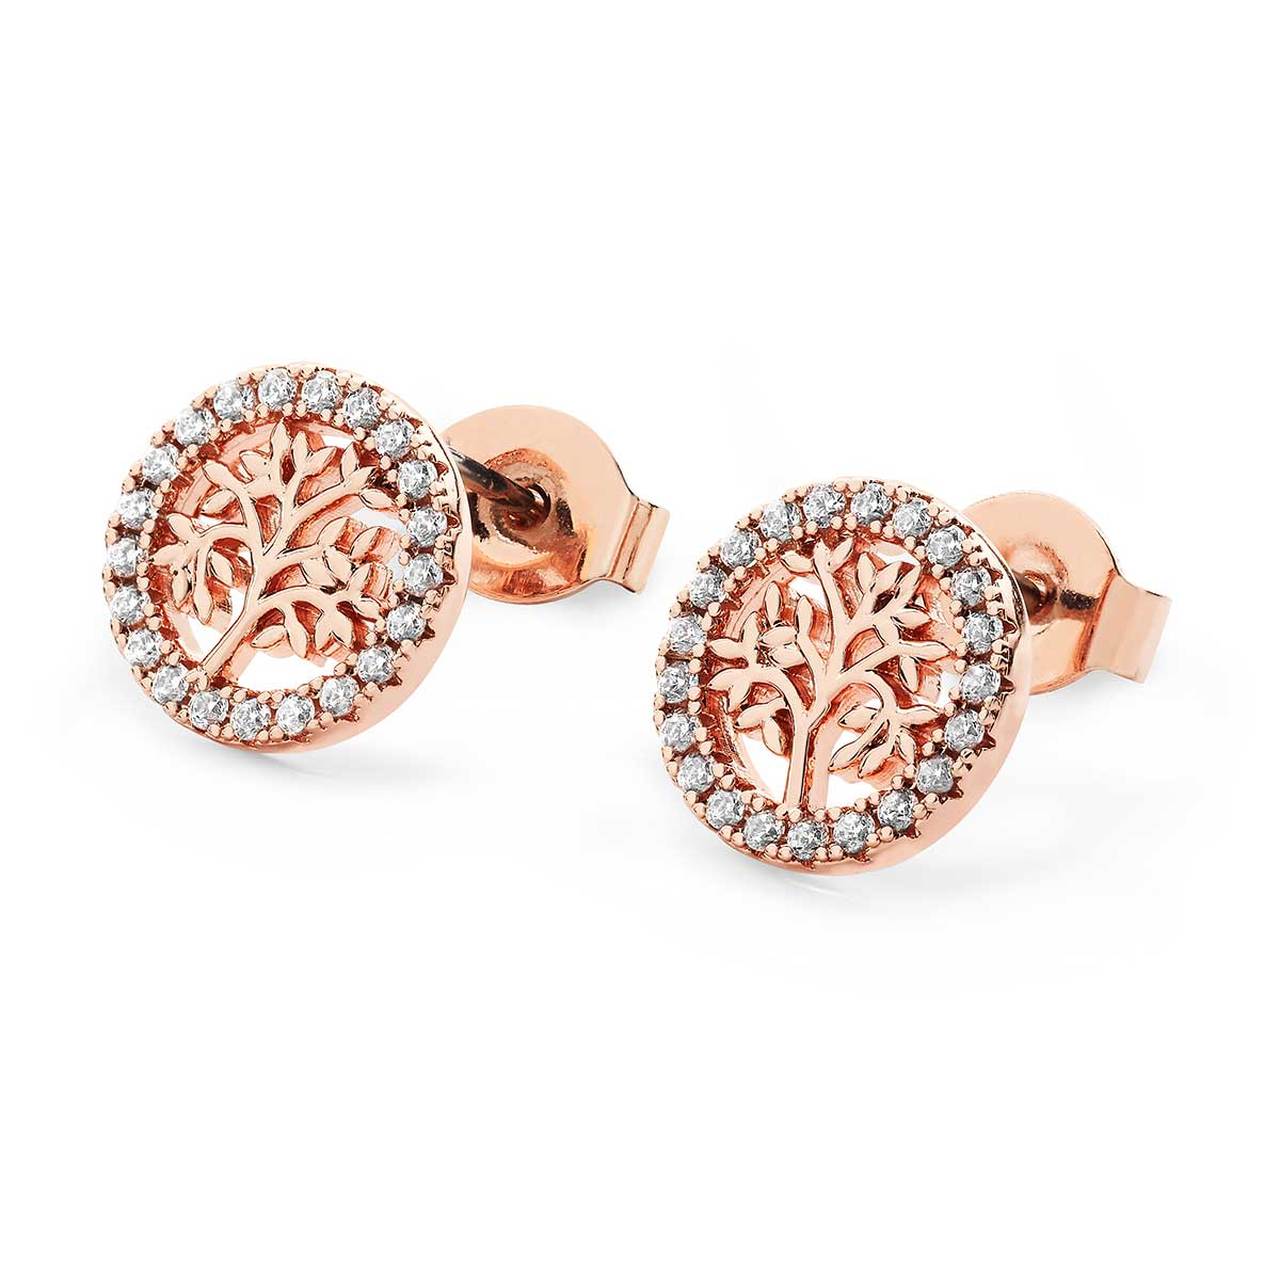 Tipperary Crystal Rose Gold Tree of Life Circle Stud Earrings  Crafted in rose gold, each eye catching rose gold stud is a full sparkling circle of clear cz crystals surrounding a delicate polished rose gold tree. They secure comfortably with push backs.